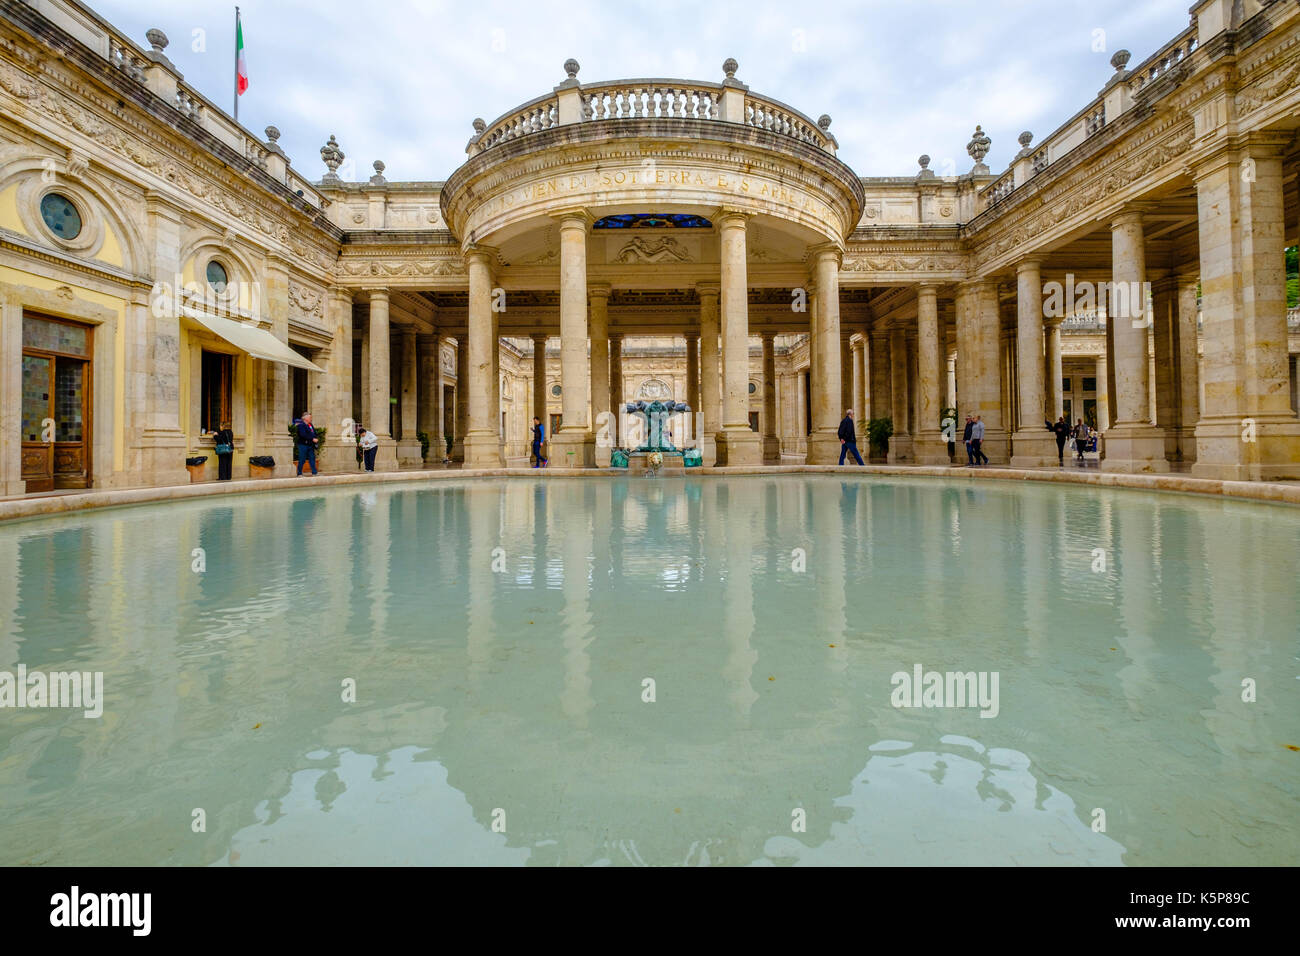 The hot springs of Tettuccio Terme are located between splendid old buildings in a wonderful park Stock Photo